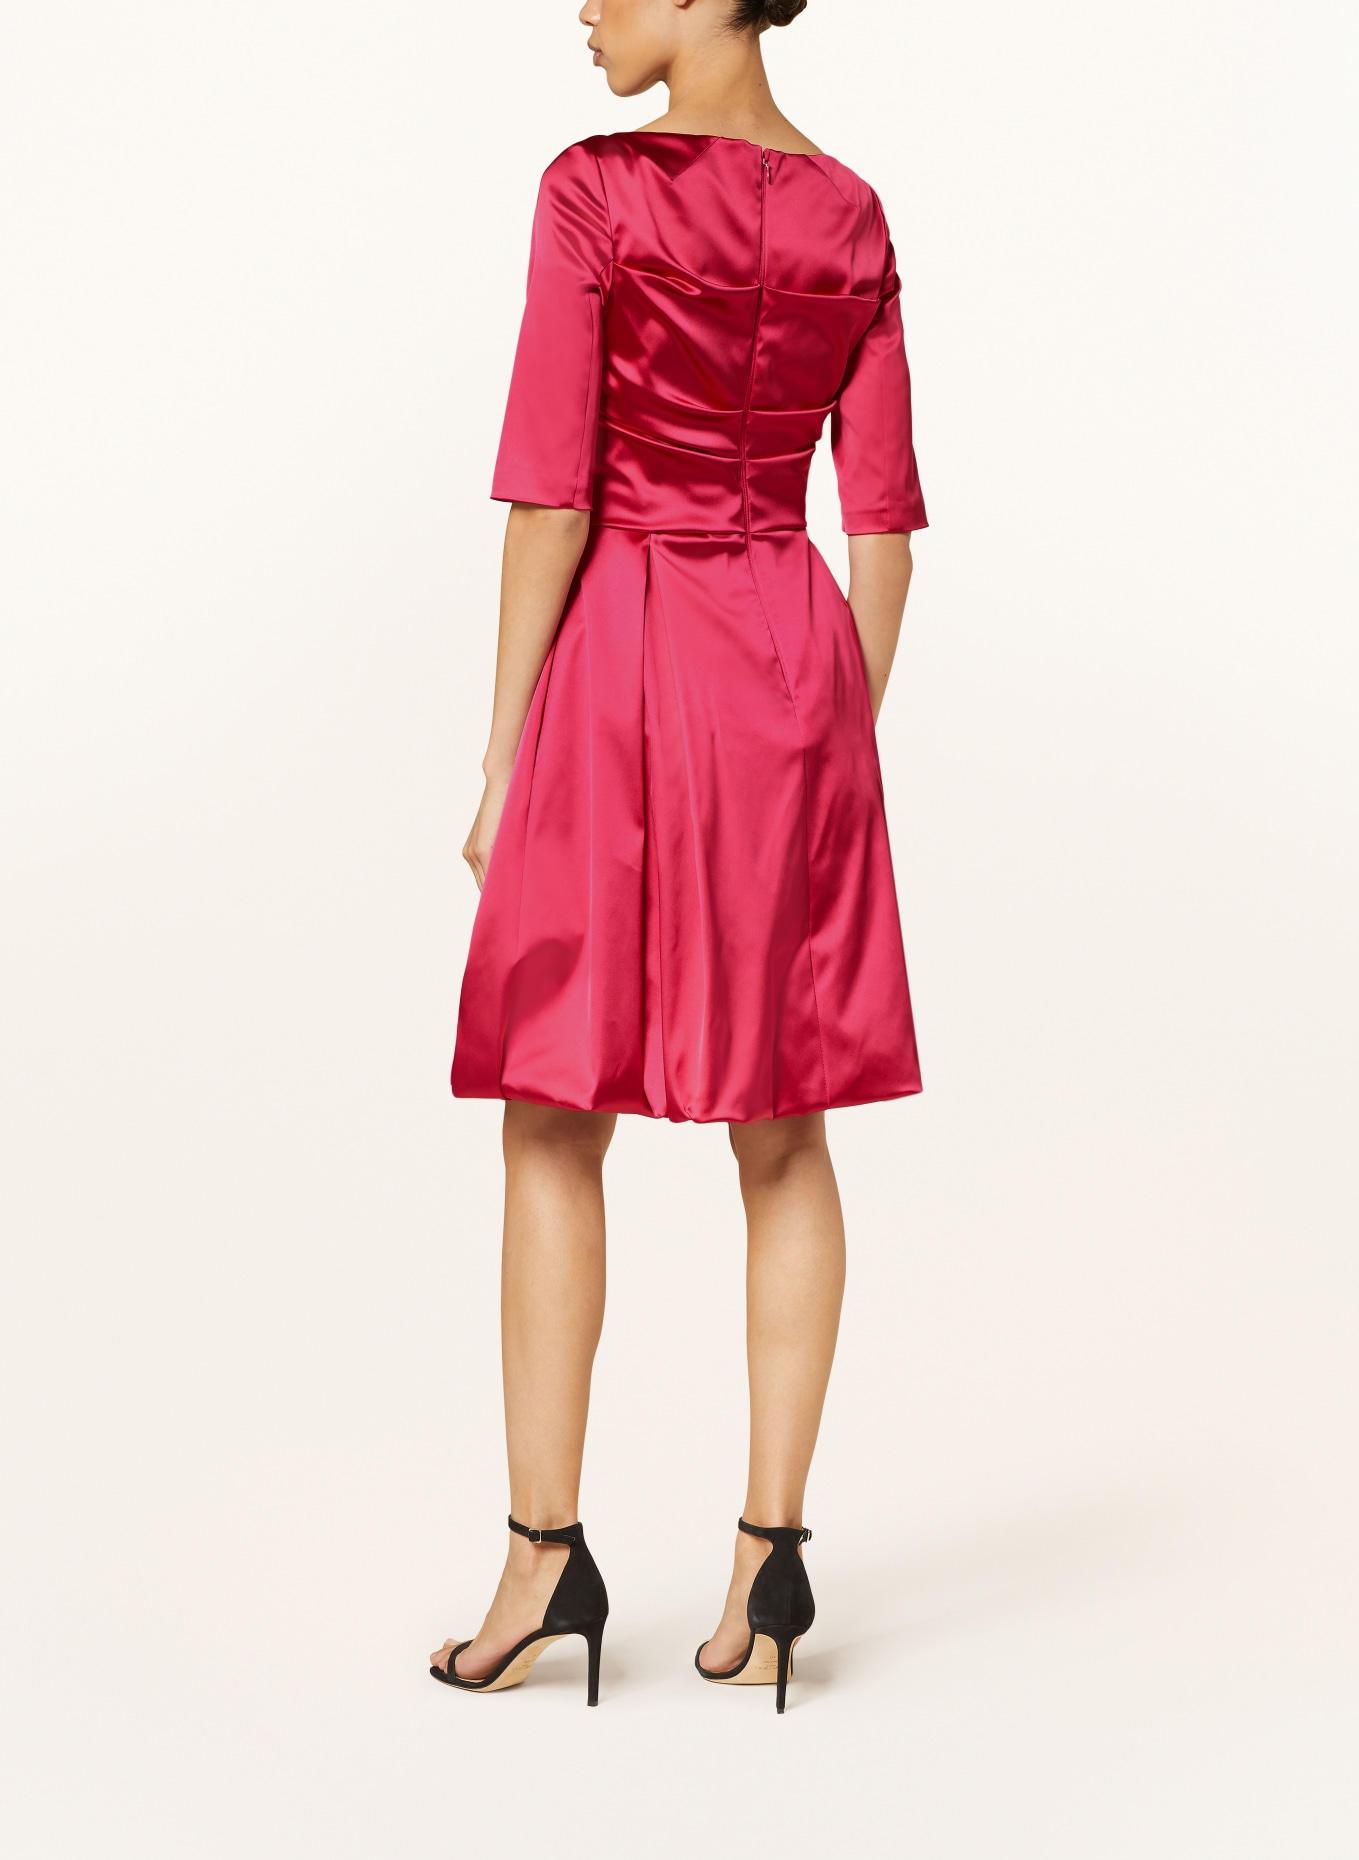 TALBOT RUNHOF Cocktail dress with 3/4 sleeves, Color: PINK (Image 3)